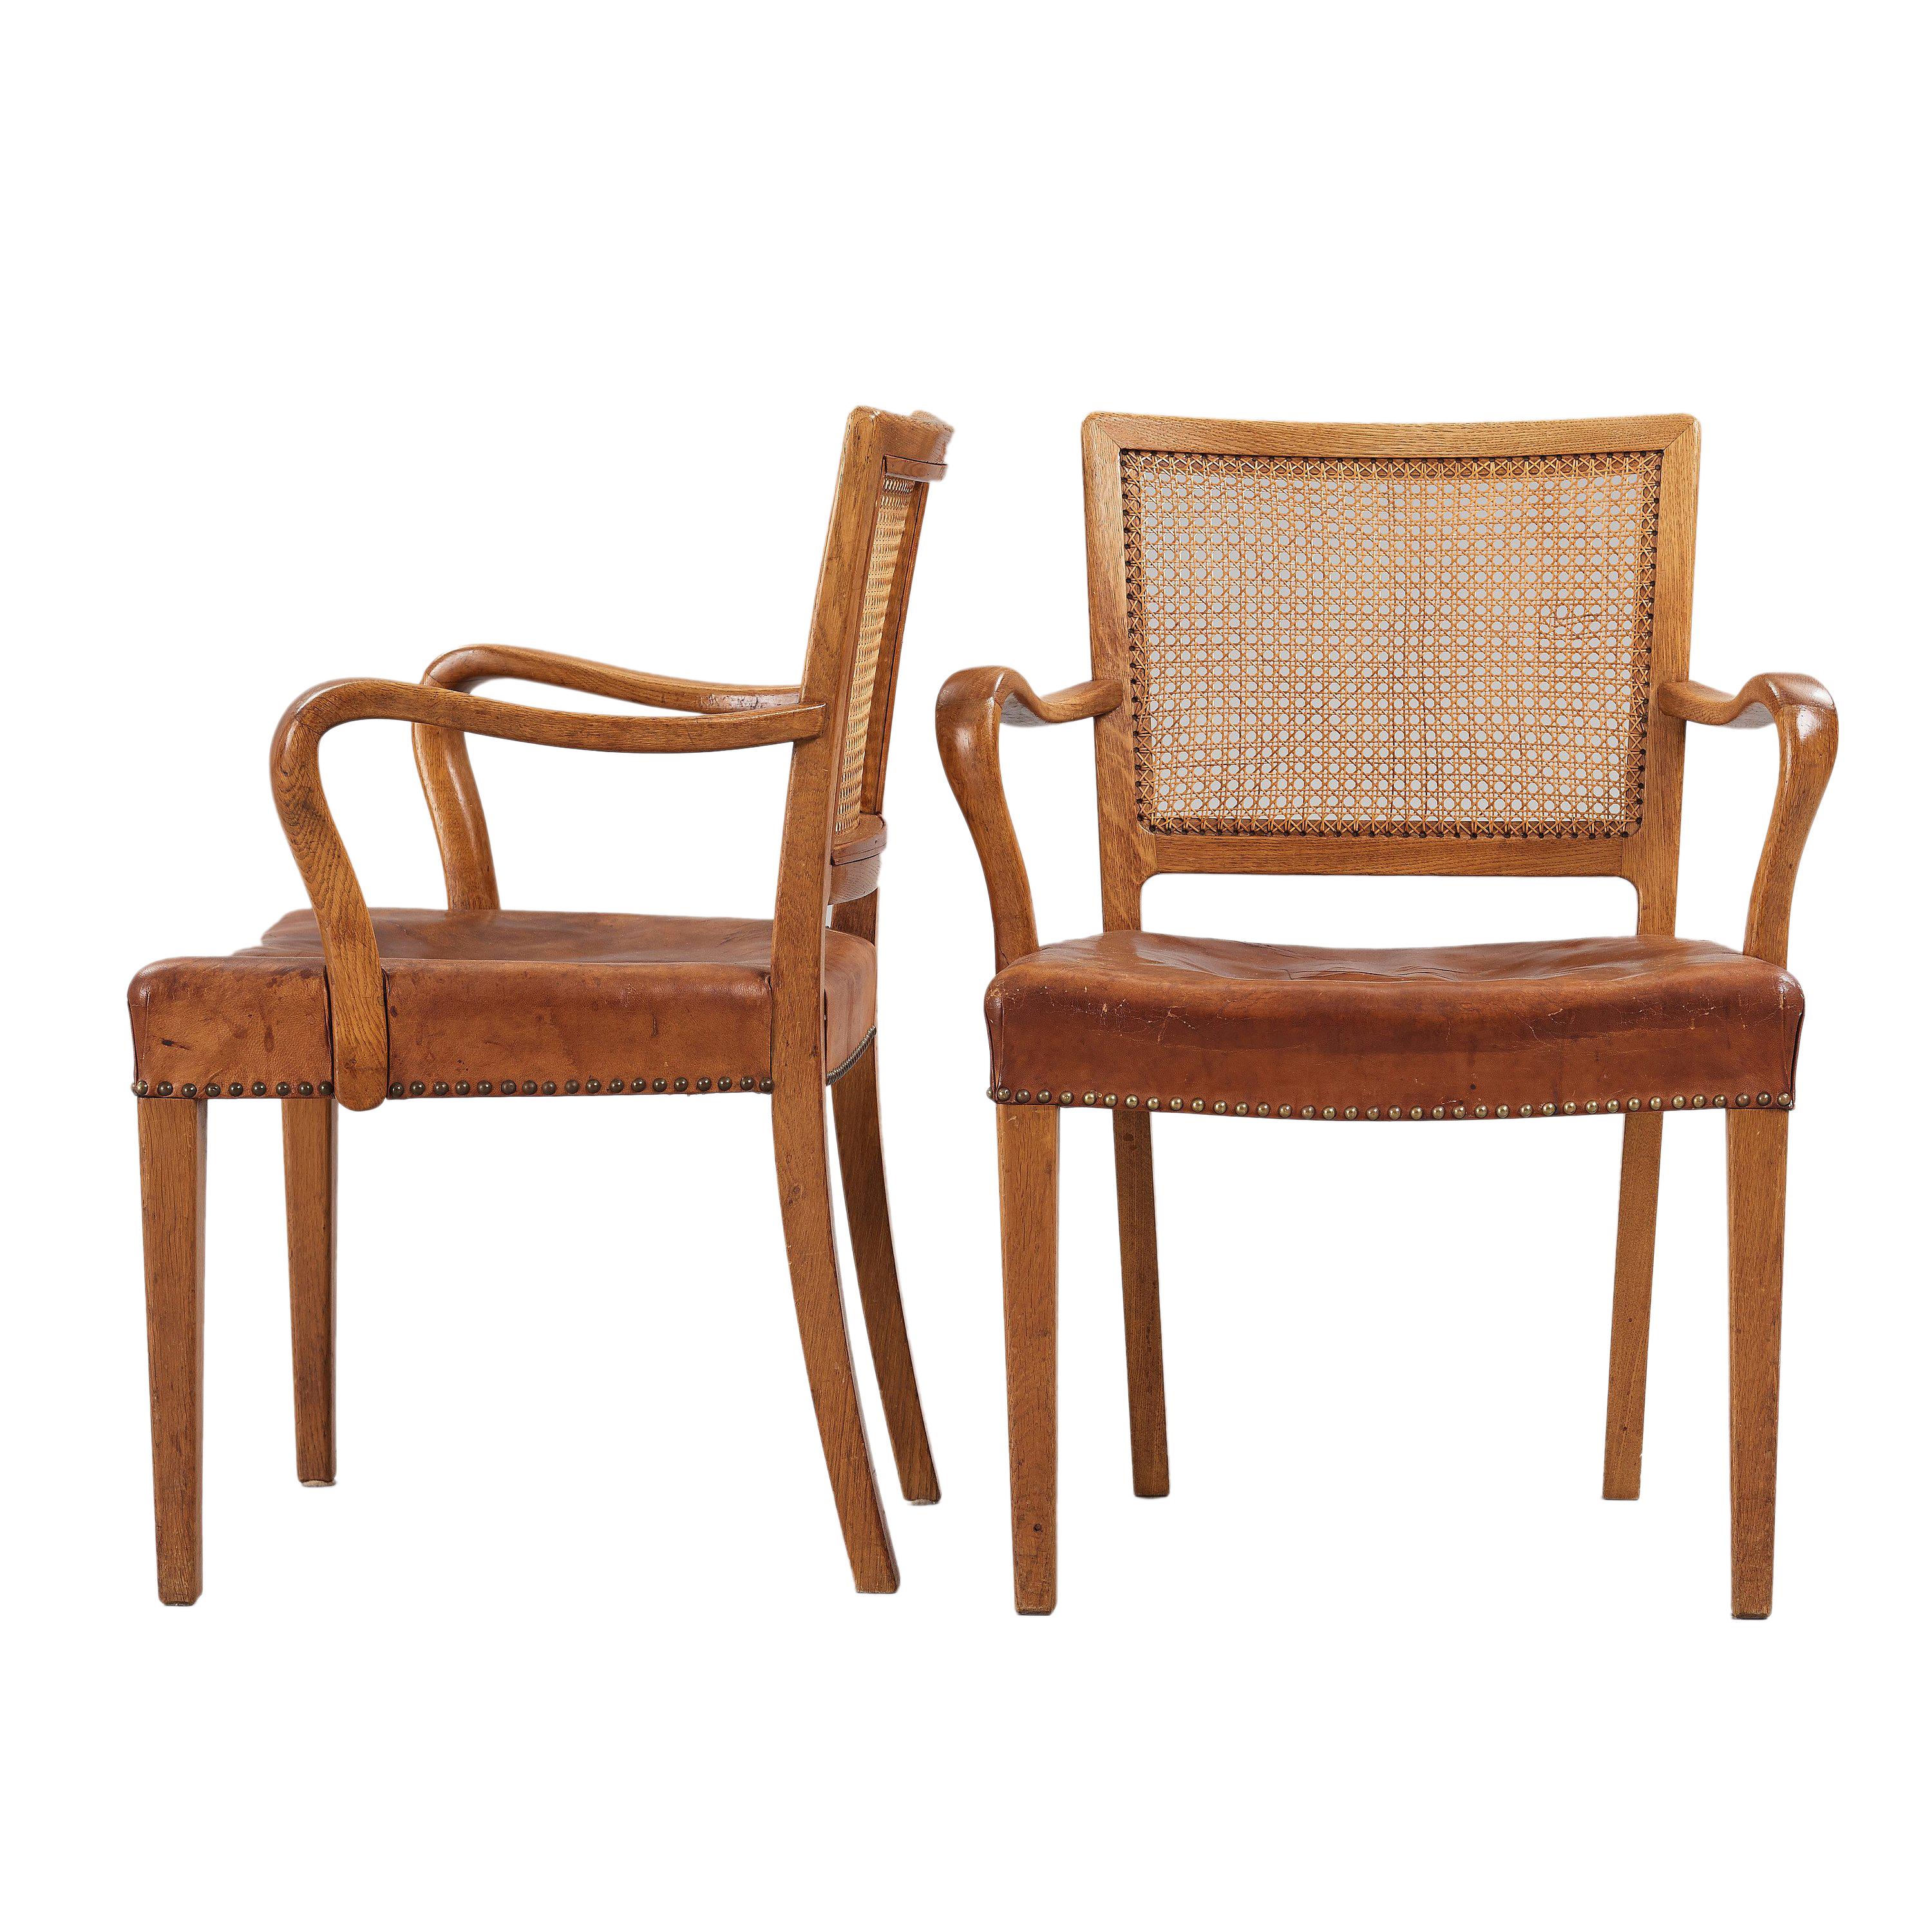 Set of 12 Erik Wørts dining chairs in solid oak, backrests in cane and seats in original Niger leather for cabinetmaker Henrik Wørts Møbelsnedkeri. The set consists of 10 side chairs and 2 armchairs. Designed 1945.

Litterature:
40 years of